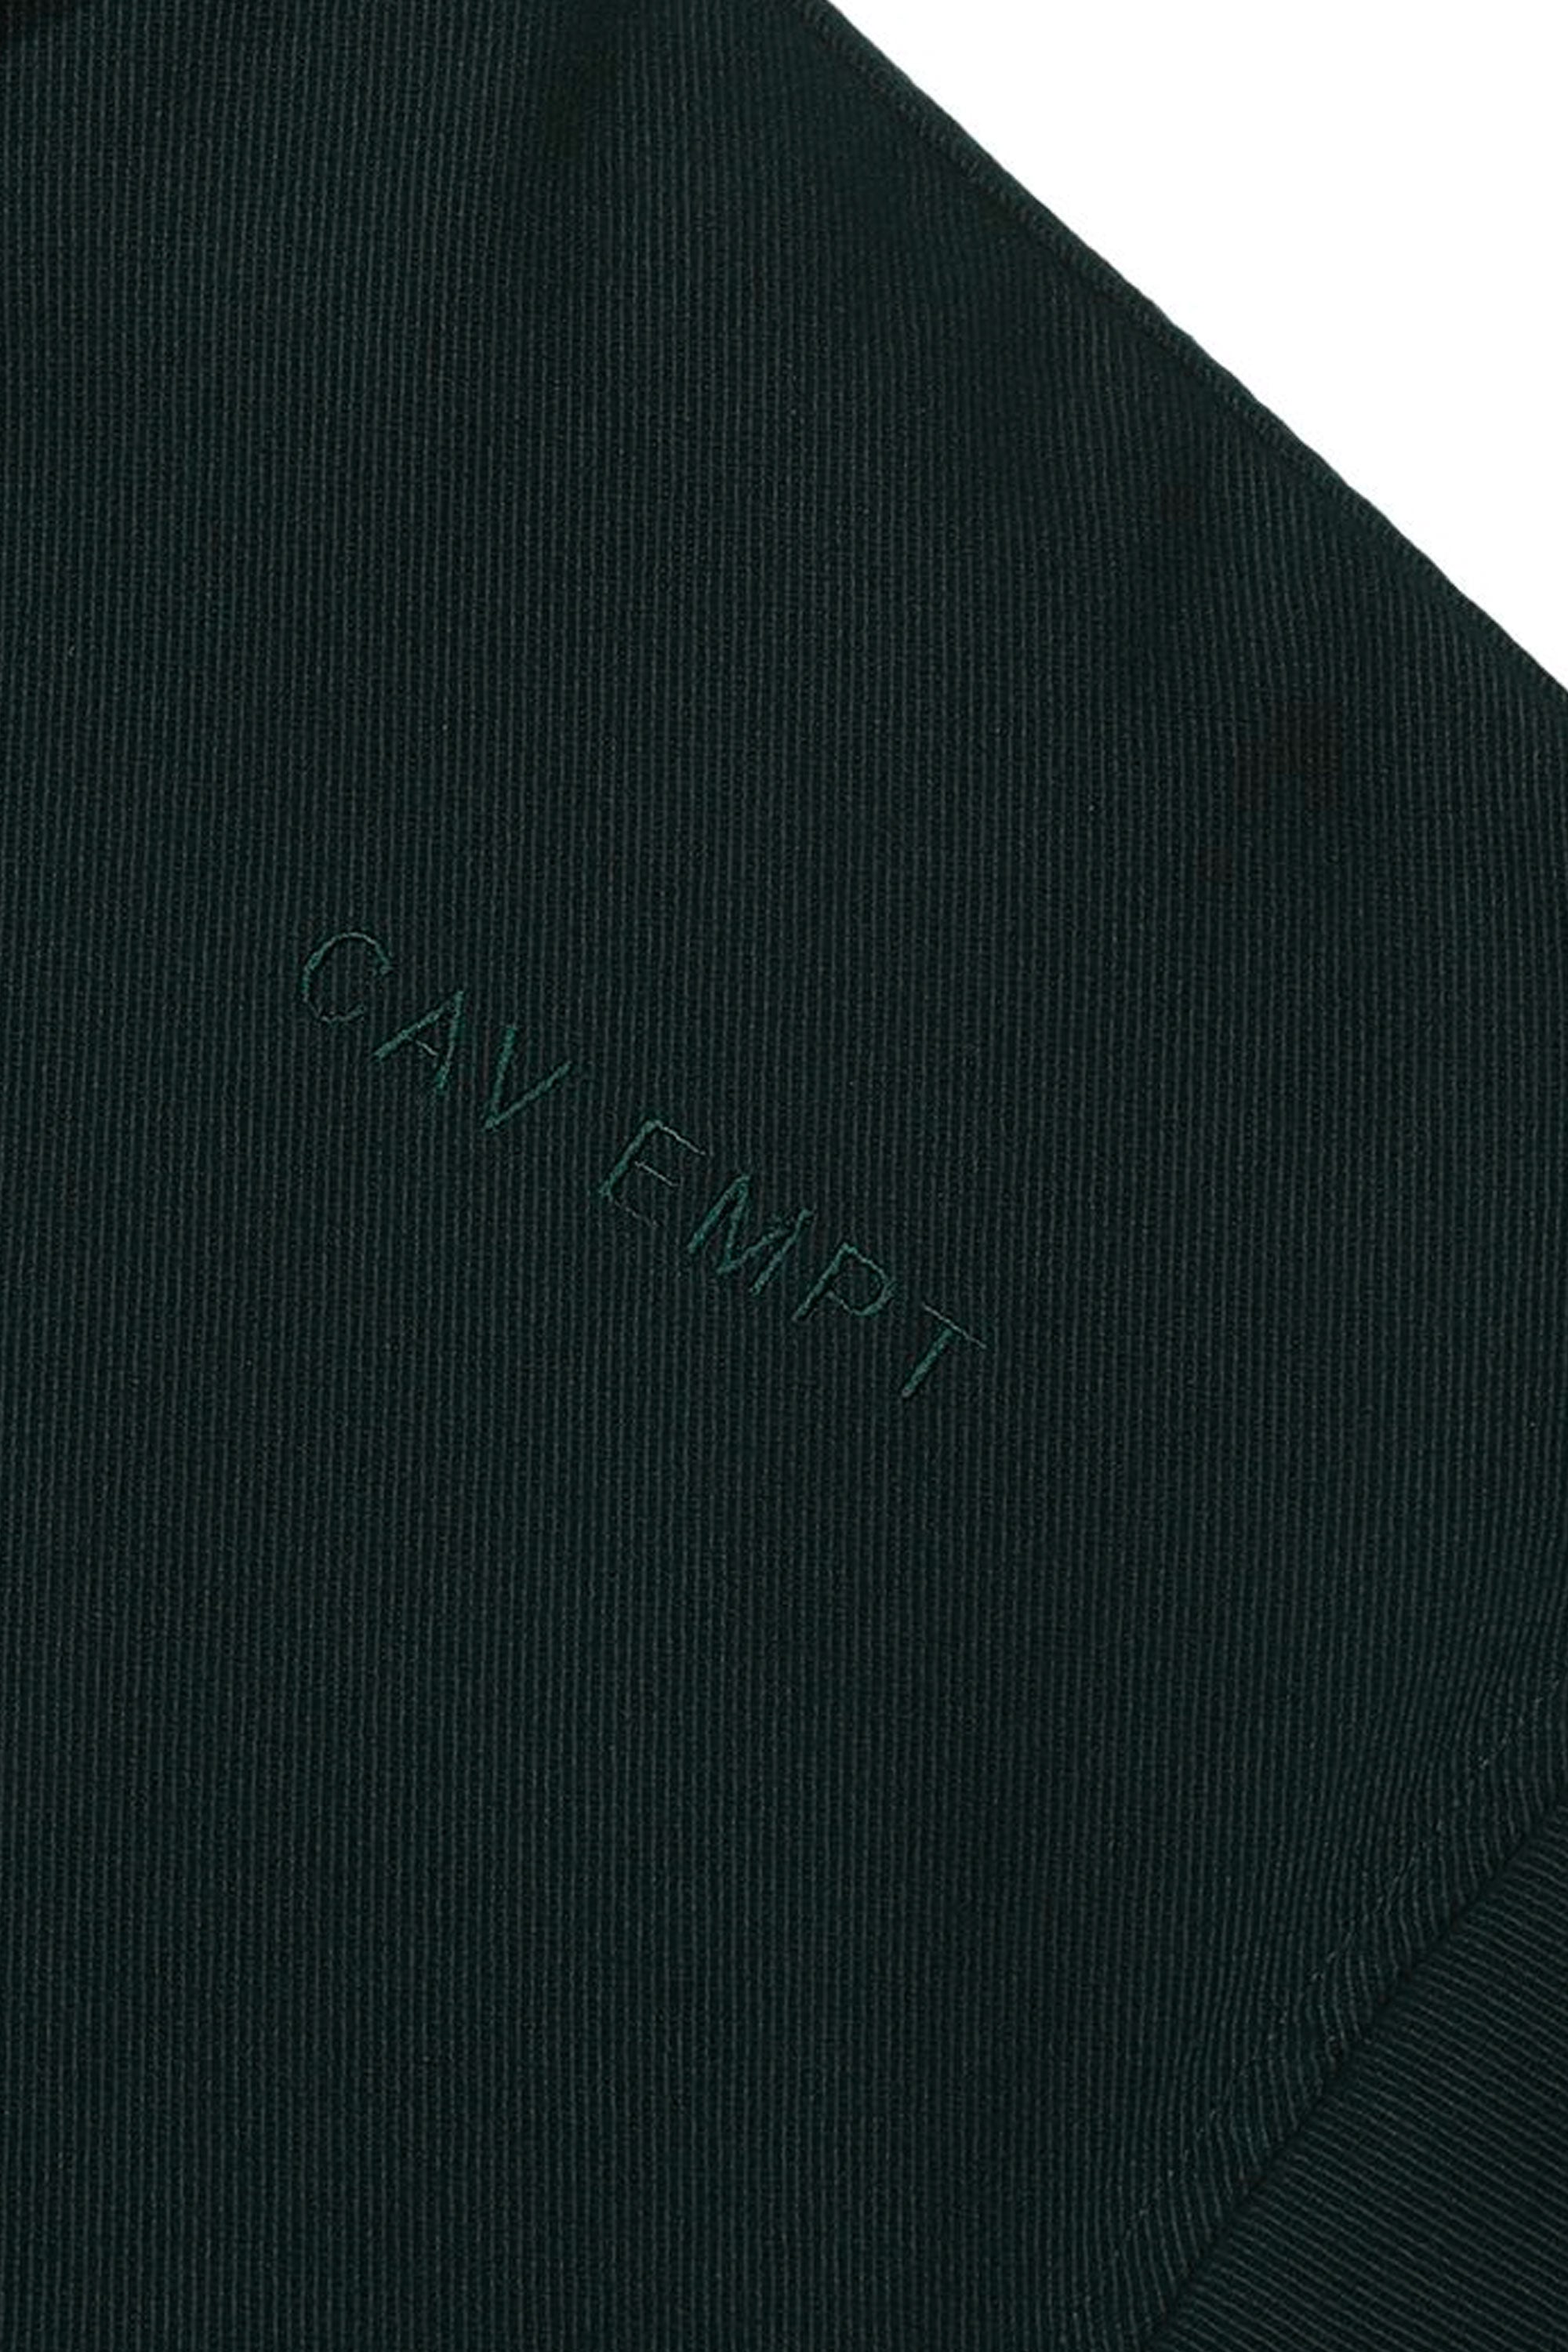 The CAV EMPT - COTTON ZIP LIGHT JACKET  available online with global shipping, and in PAM Stores Melbourne and Sydney.